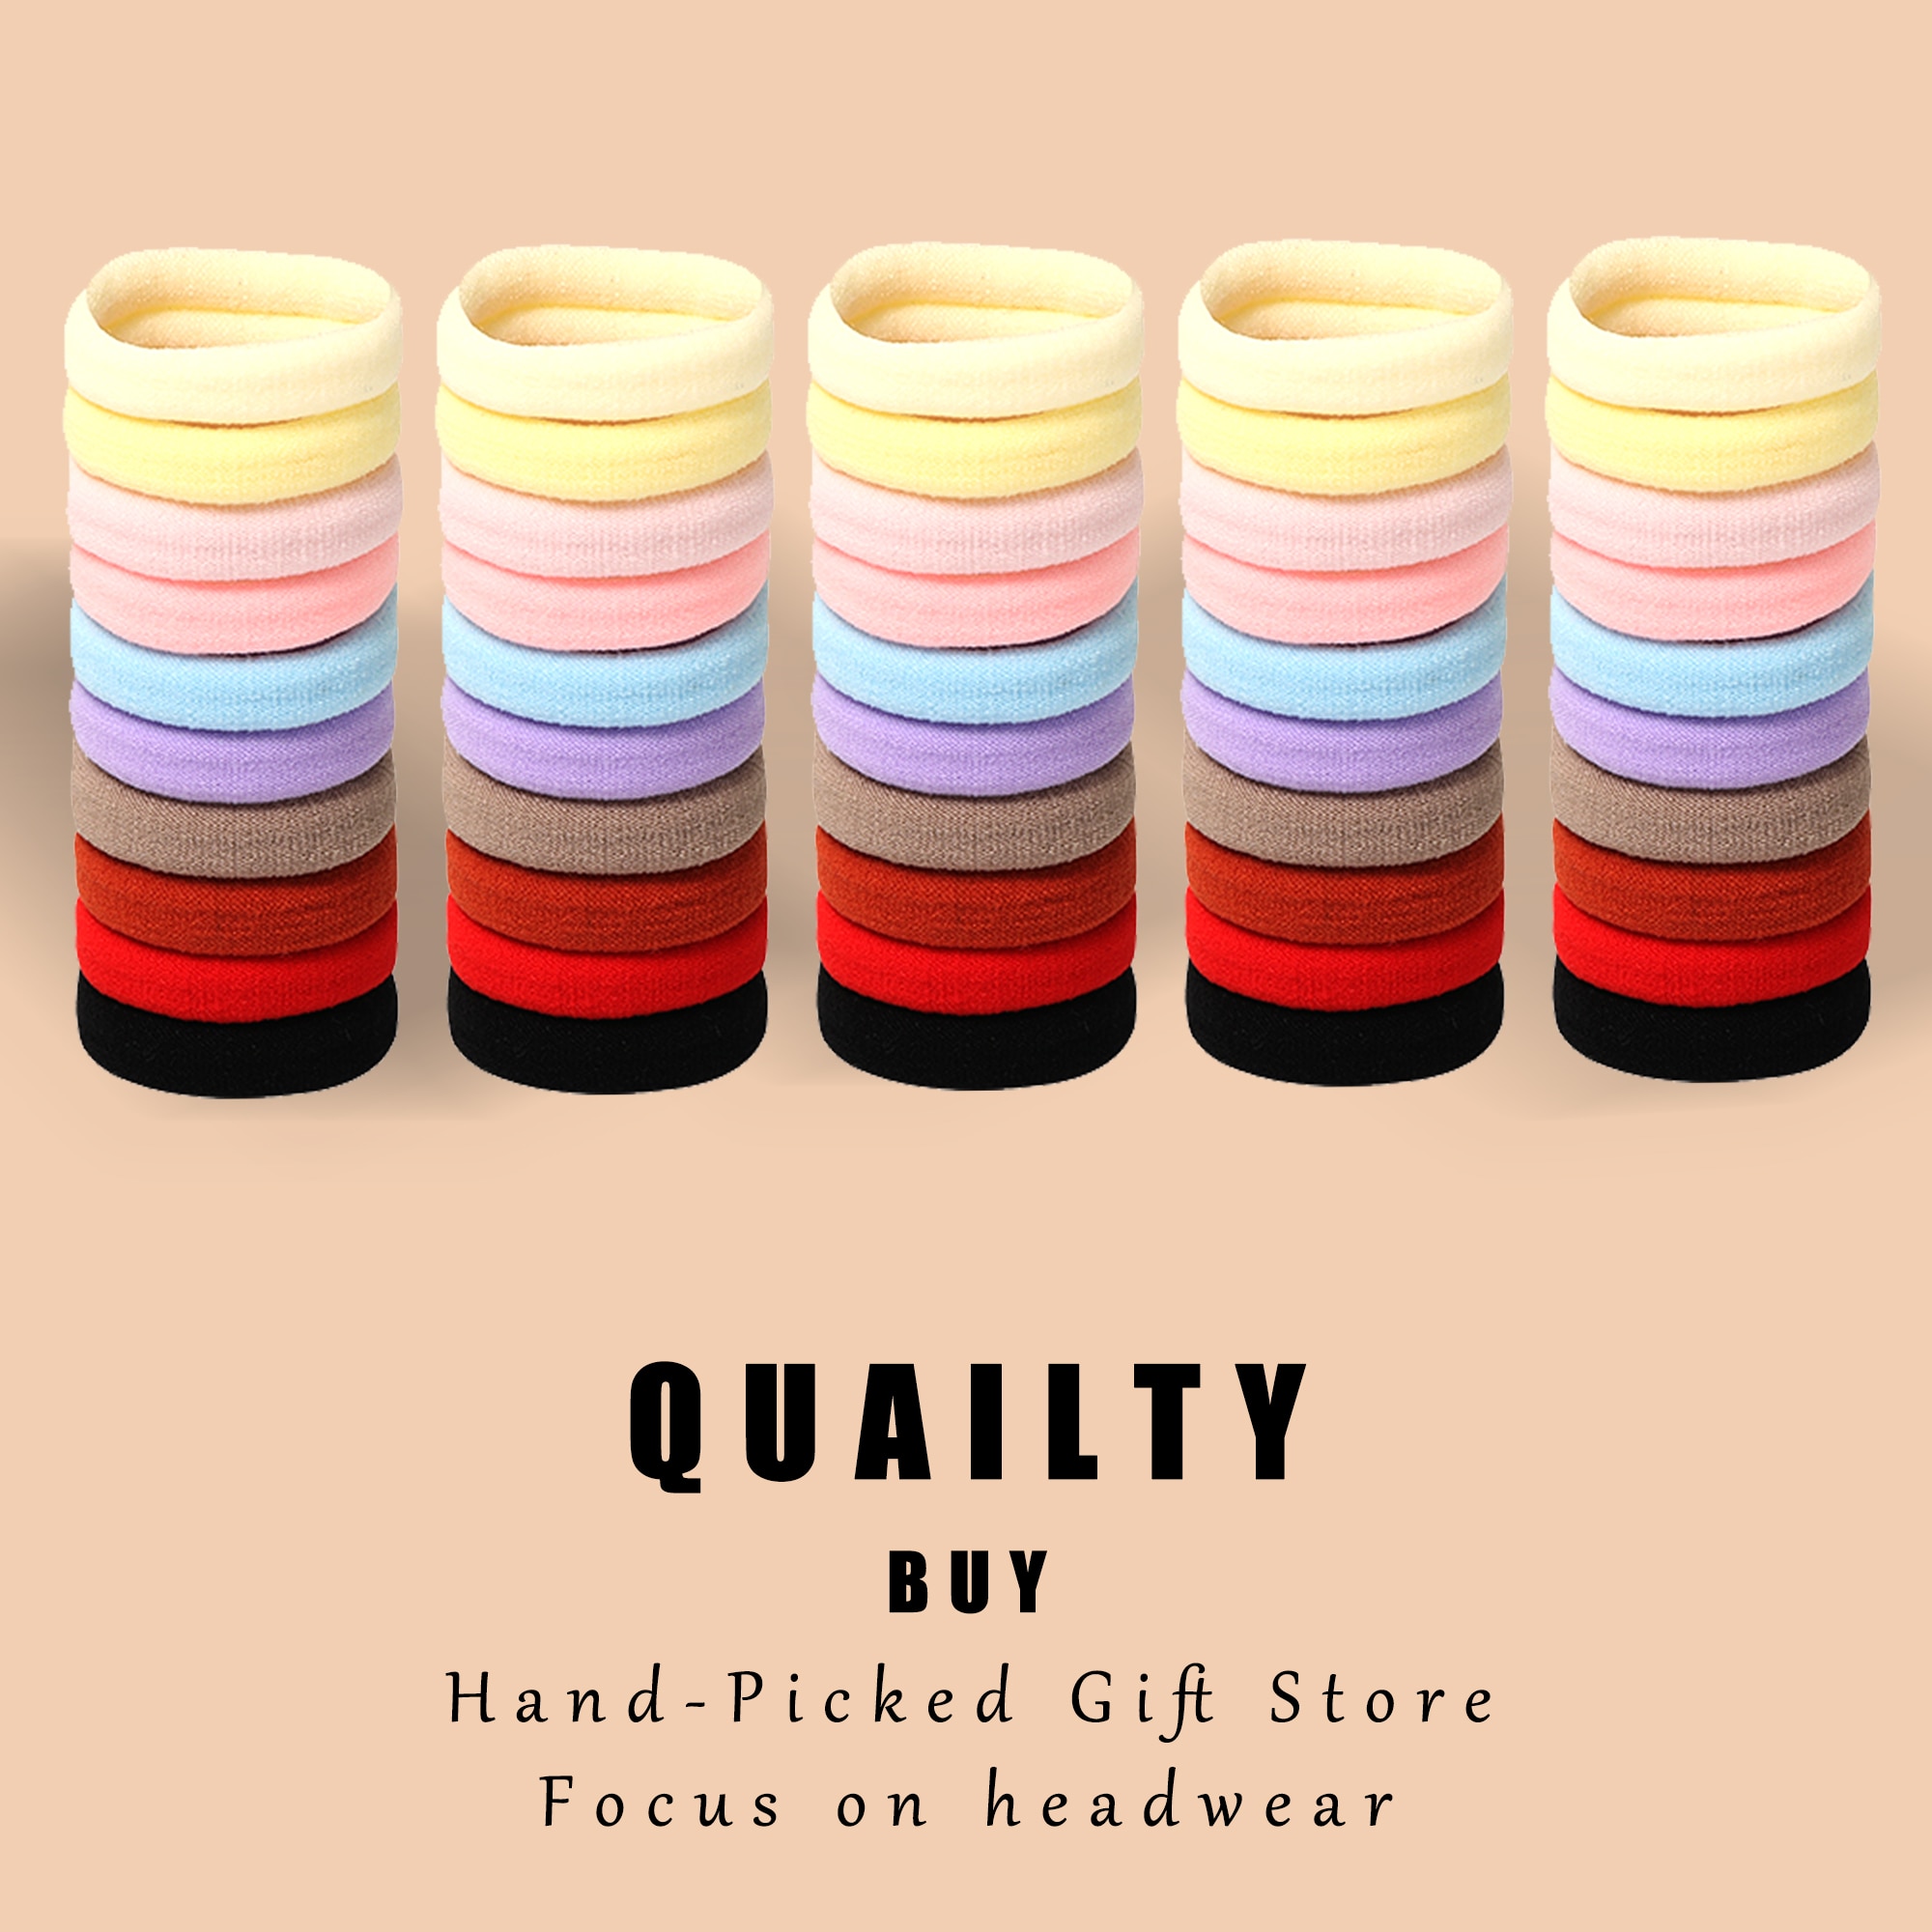 50 or 100 Girls Supplies Large Small Premium Ponytail Rubber Headband Colorful Stretch Korean Stretch Bestseller Summer Kids